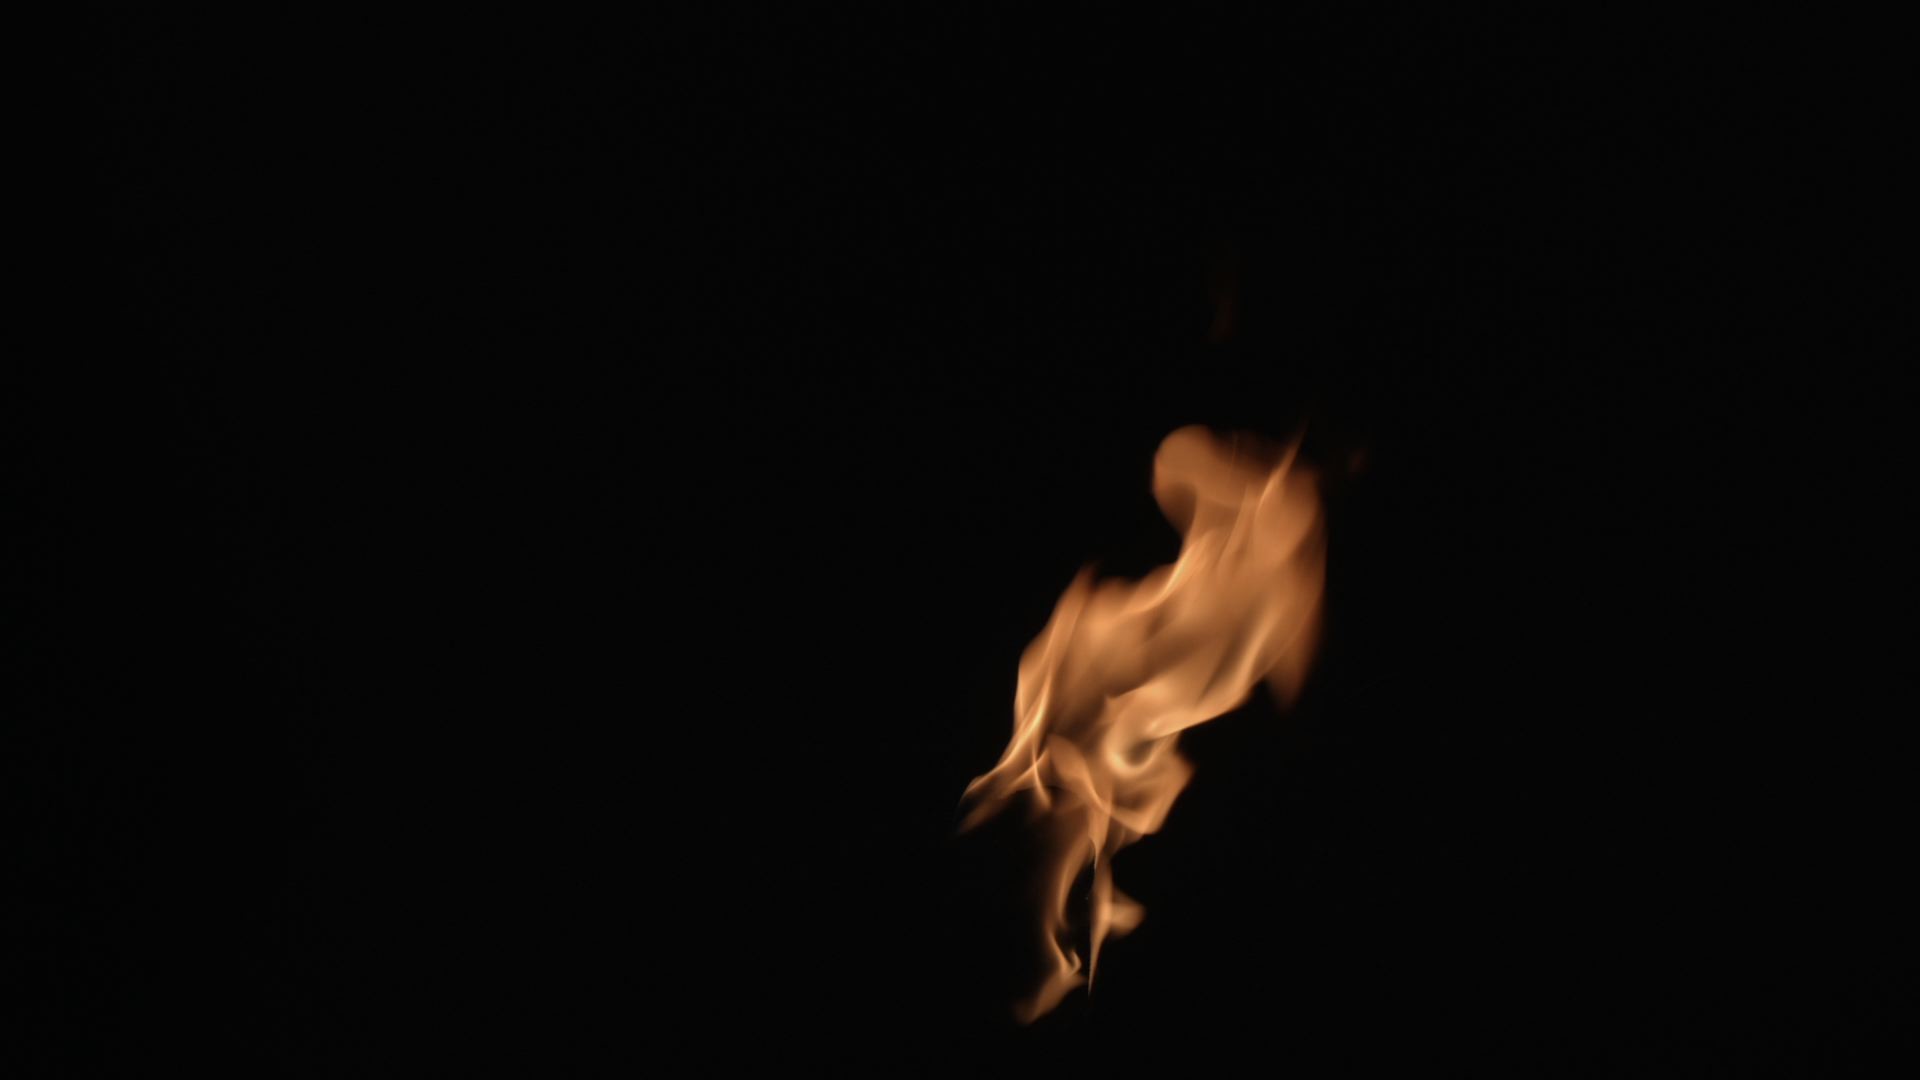 The flame element, shot at night in the garden to ensure a seamless black background